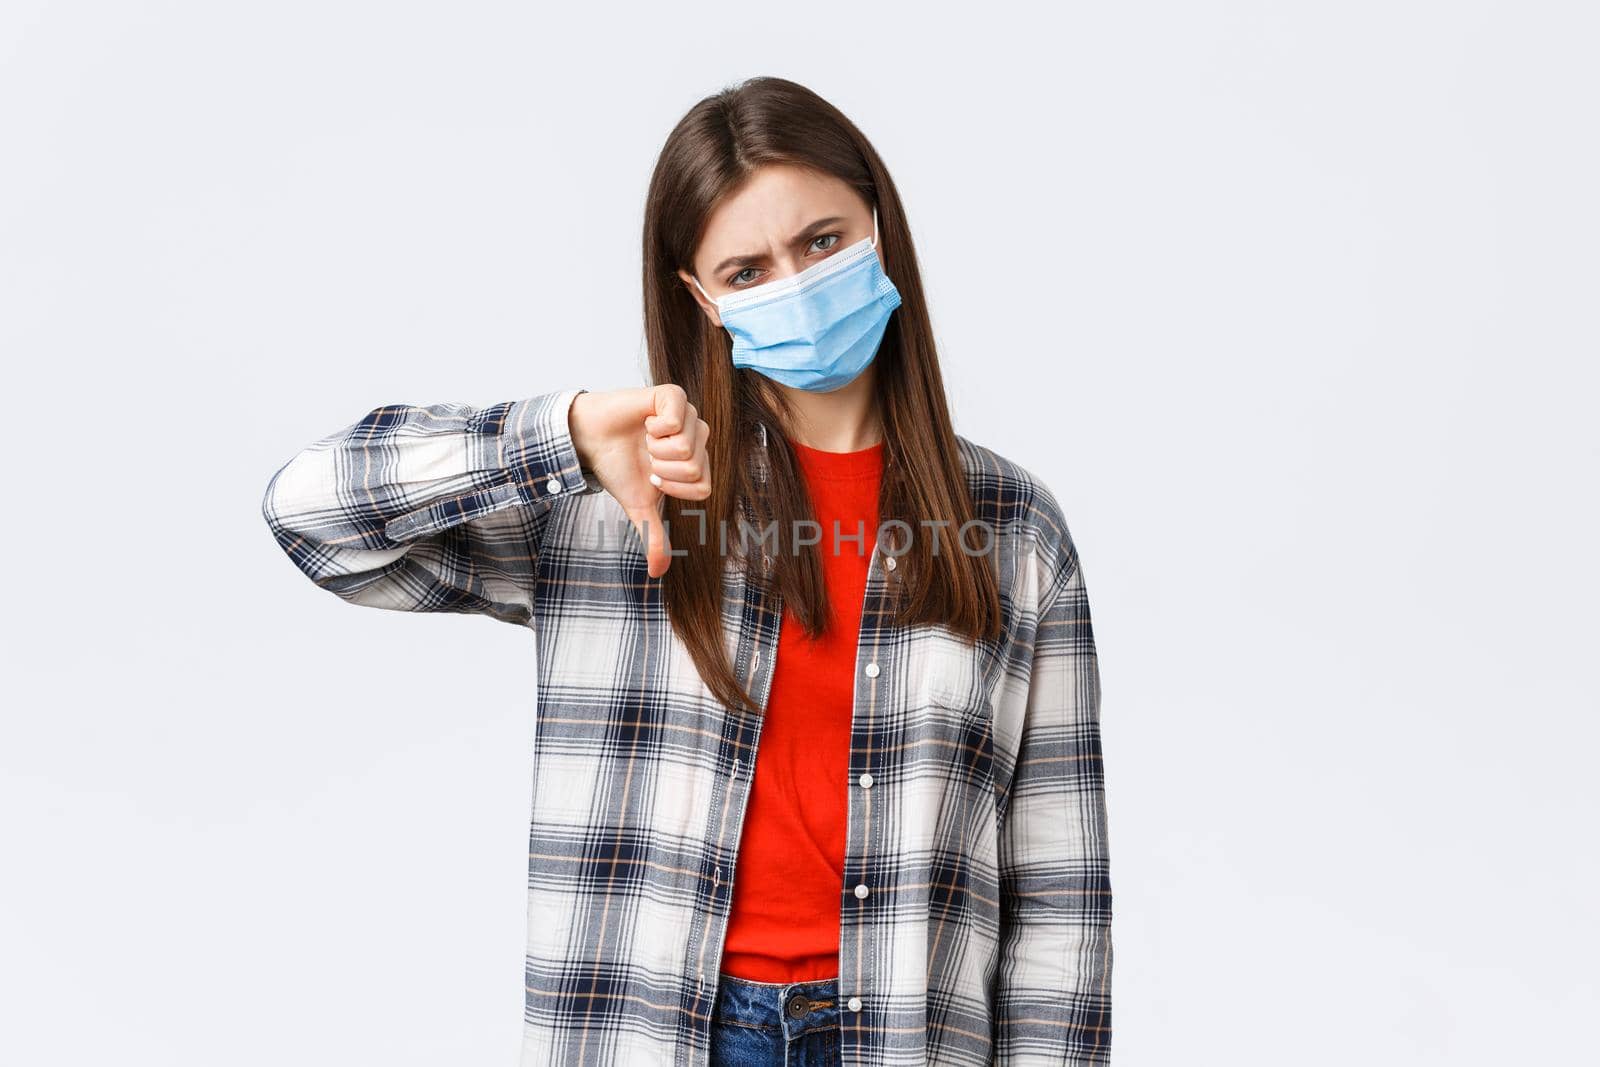 Coronavirus outbreak, leisure on quarantine, social distancing and emotions concept. Lame bad idea. Displeased and unamused young woman in medical mask thumb-down in disapproval by Benzoix